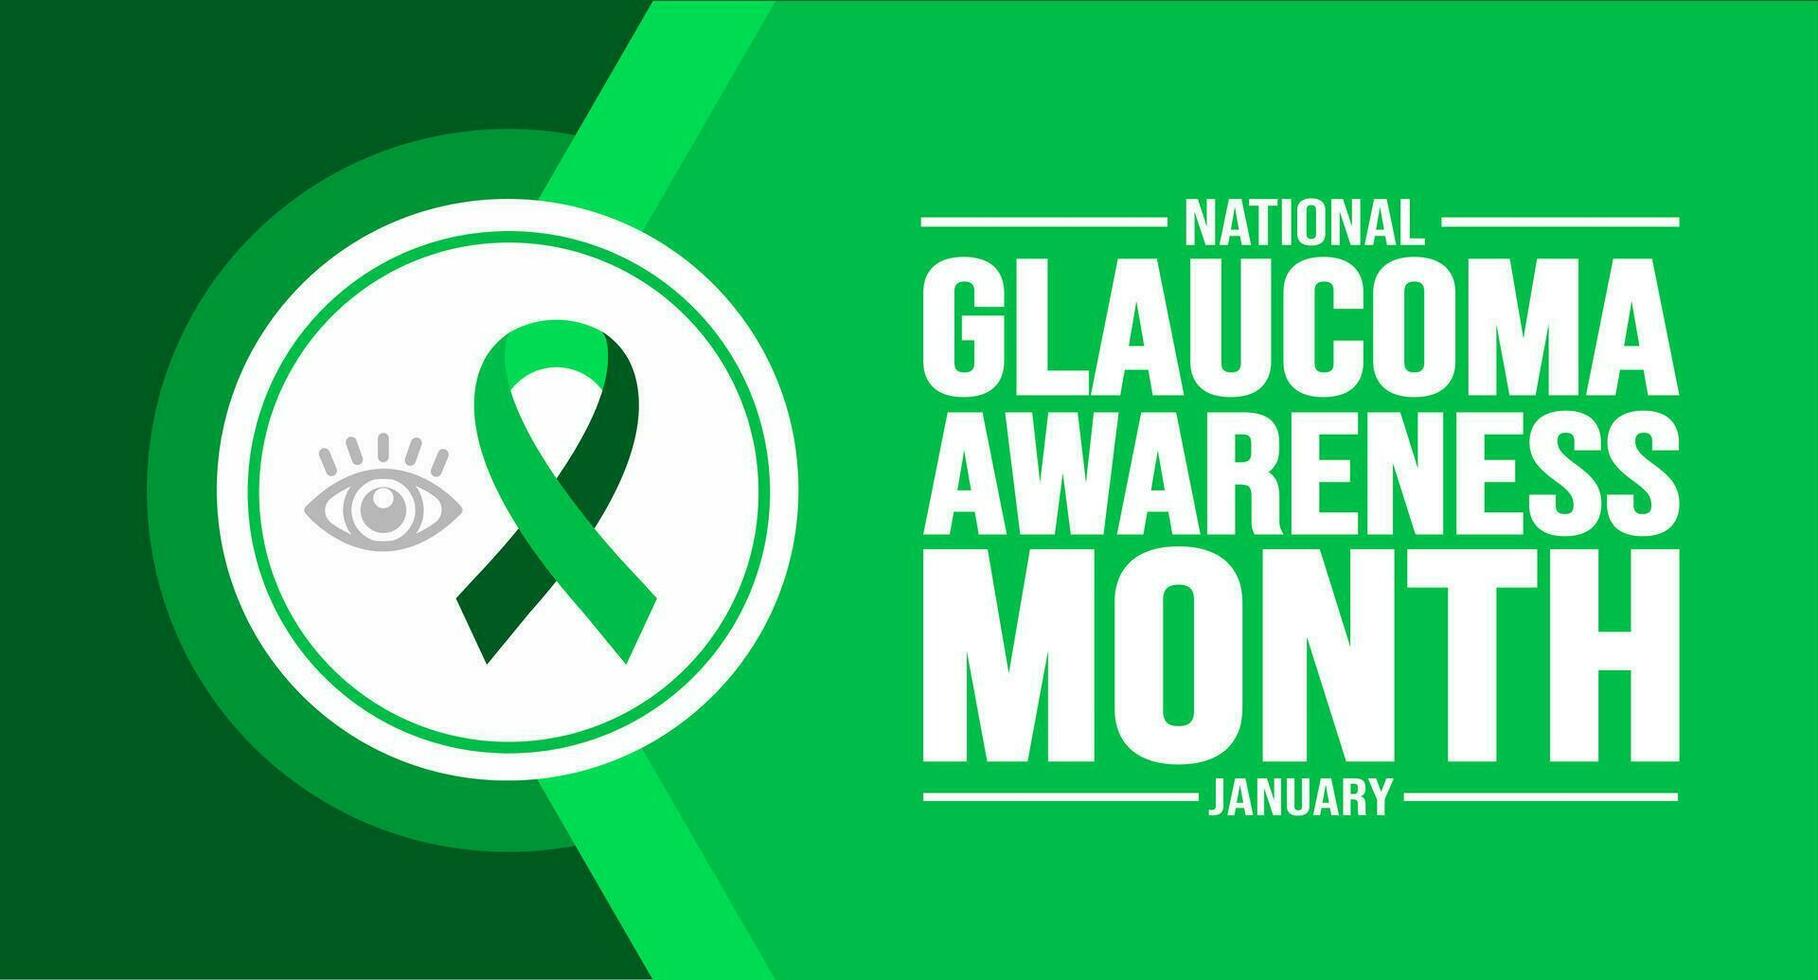 January is Glaucoma Awareness Month background template. Holiday concept. background, banner, placard, card, and poster design template with text inscription and standard color. vector illustration.